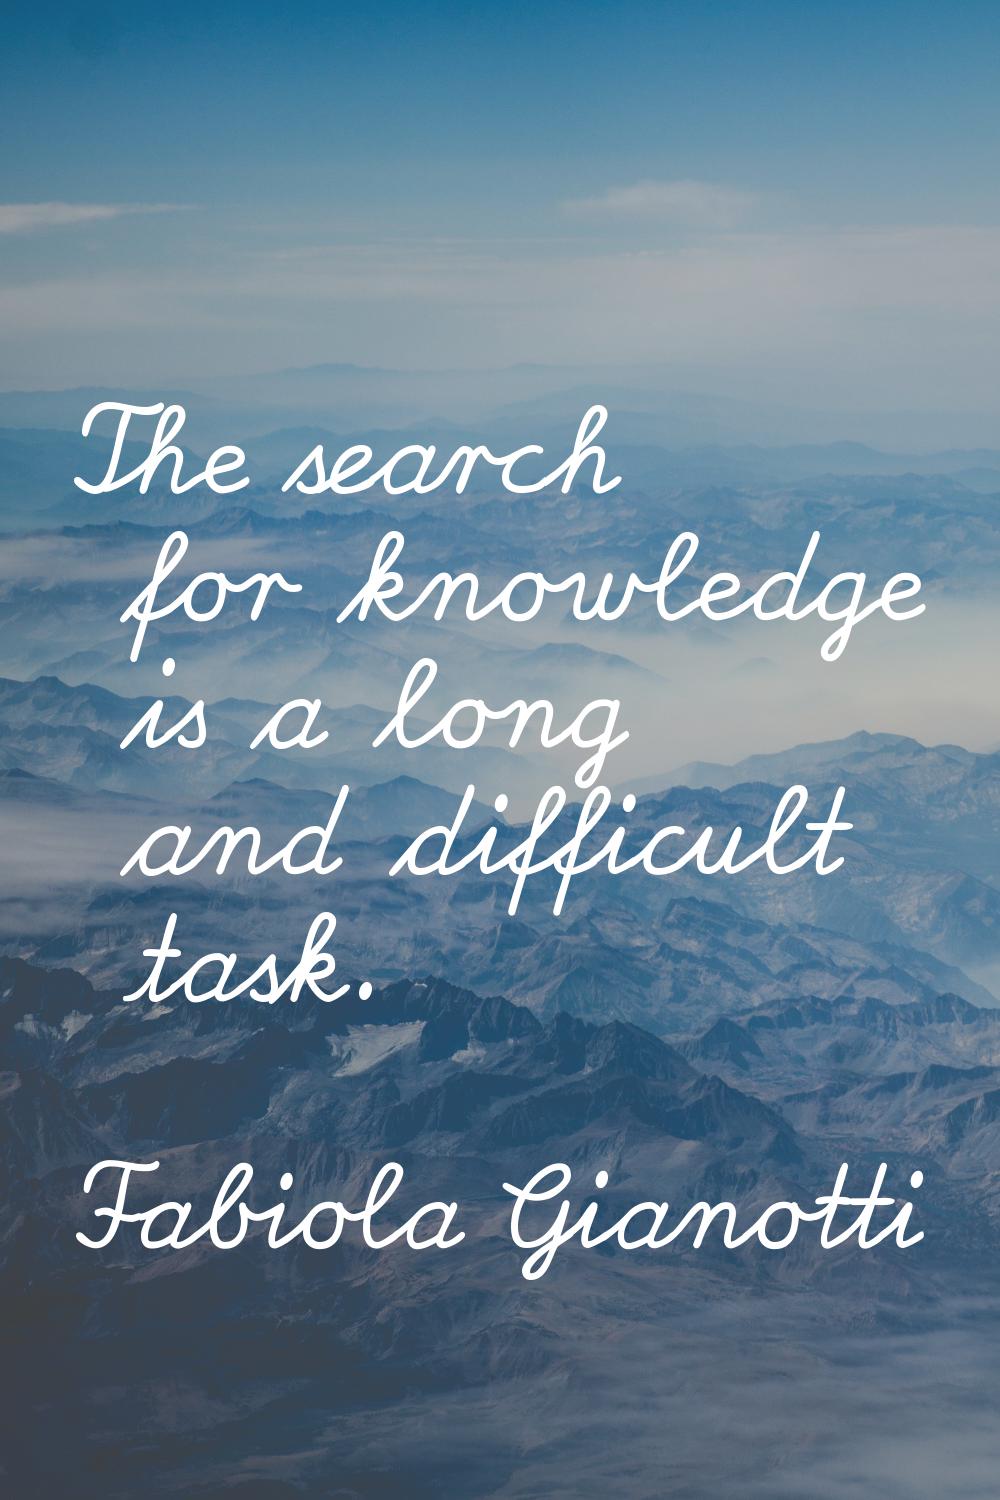 The search for knowledge is a long and difficult task.